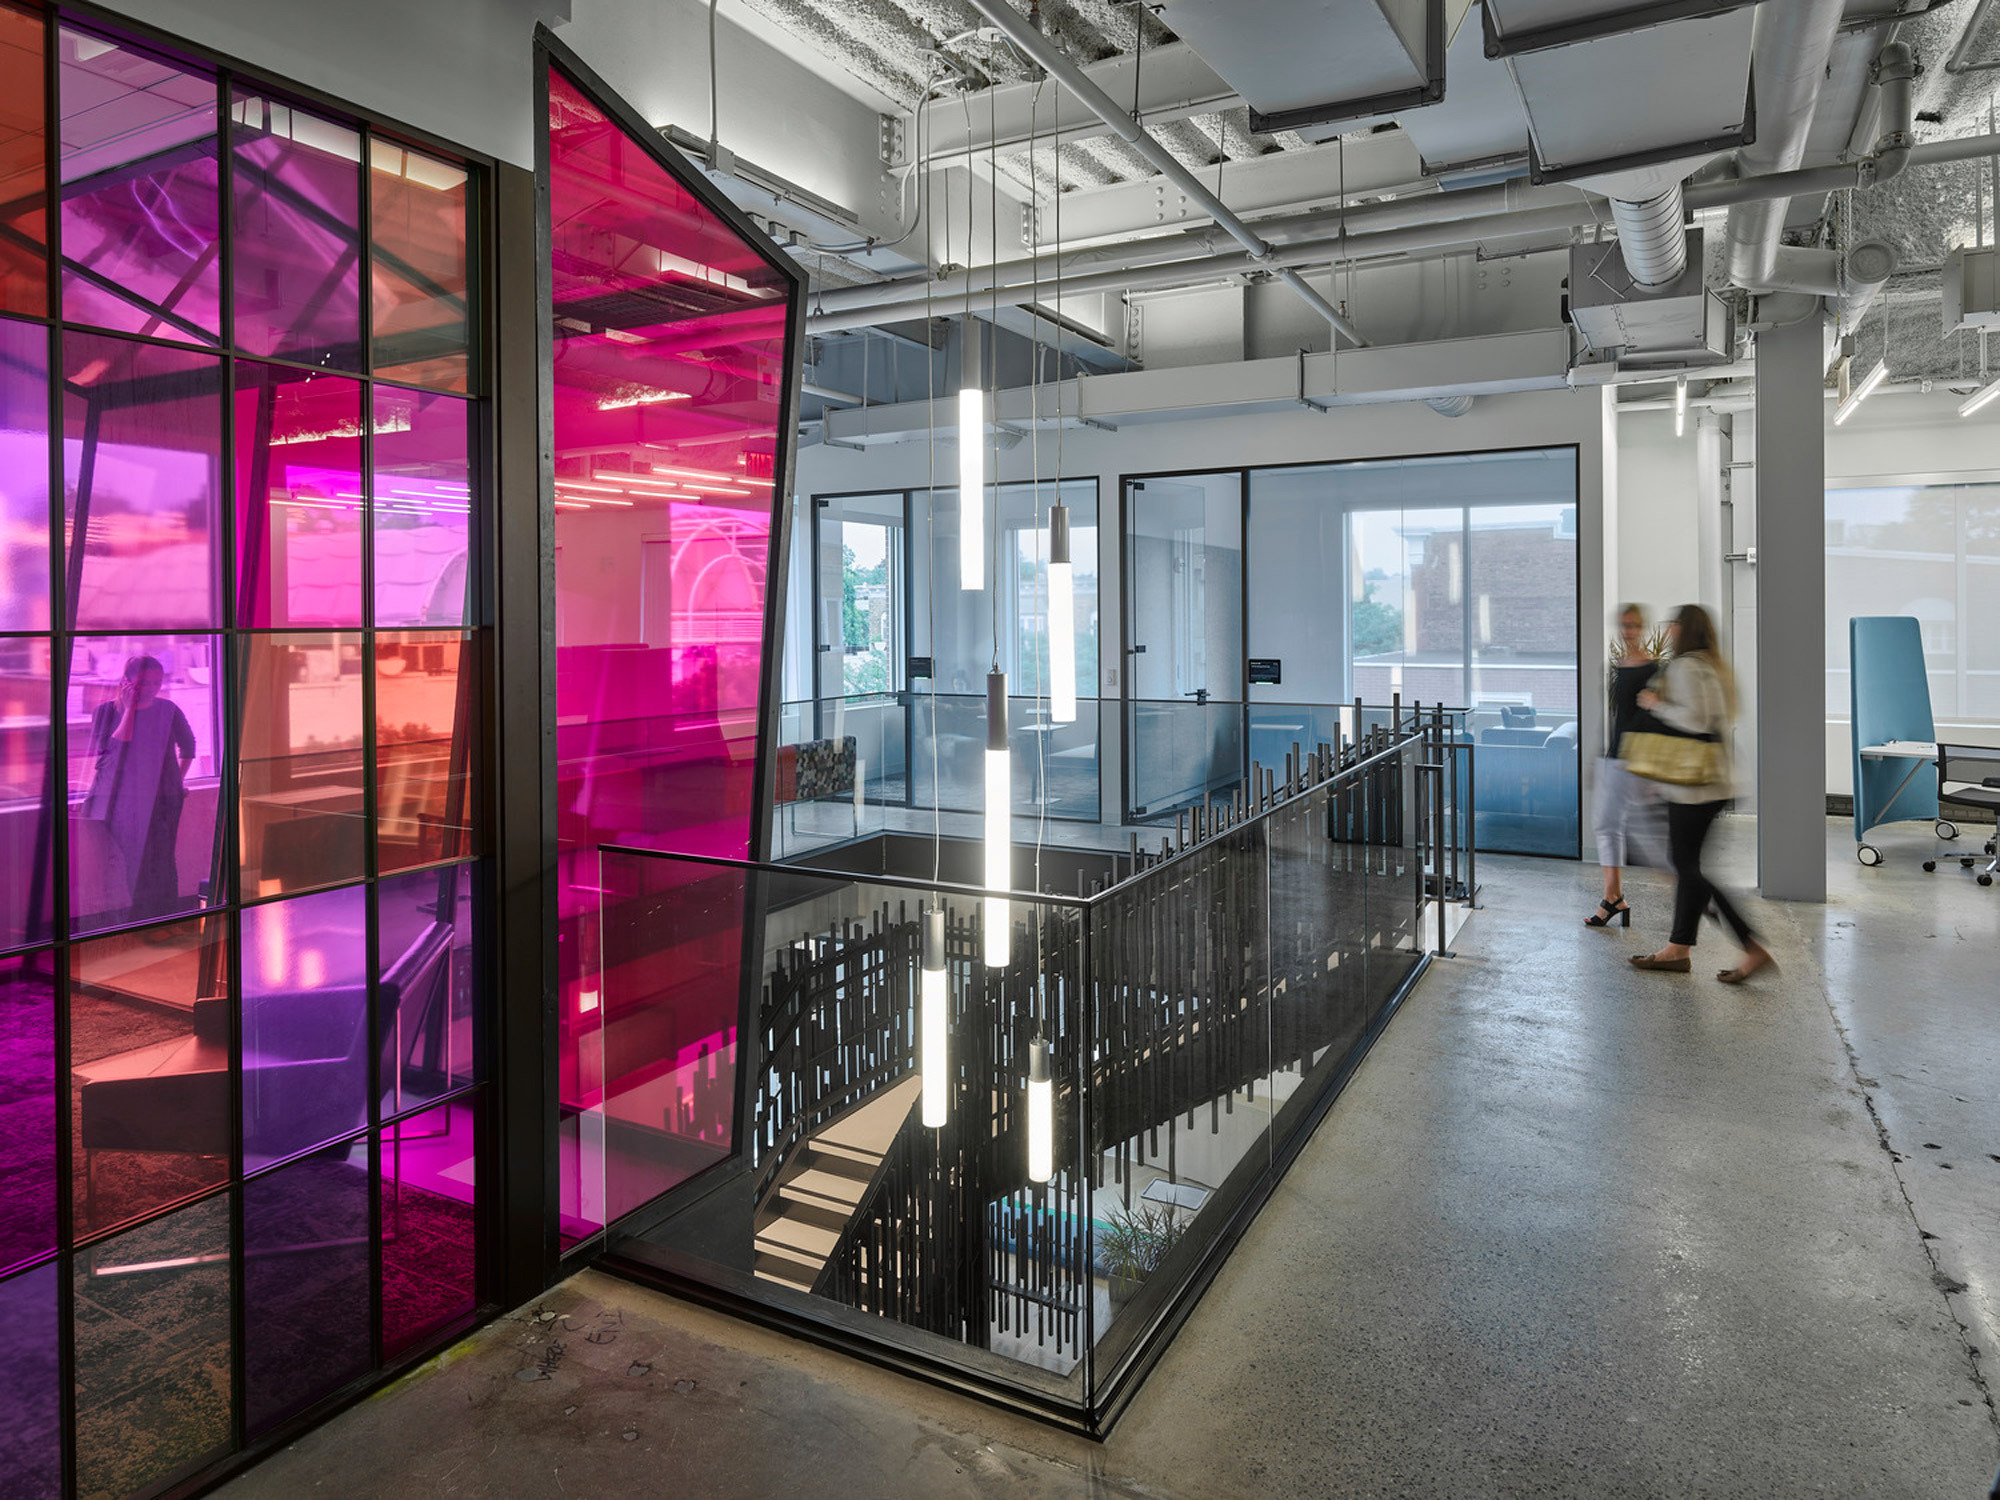 Modern office interior featuring translucent pink glass partitions, creating a dynamic contrast with the industrial aesthetic of exposed pipes and ductwork. A sleek black staircase with railing descends into the vibrant space, complemented by the natural light streaming through large windows.